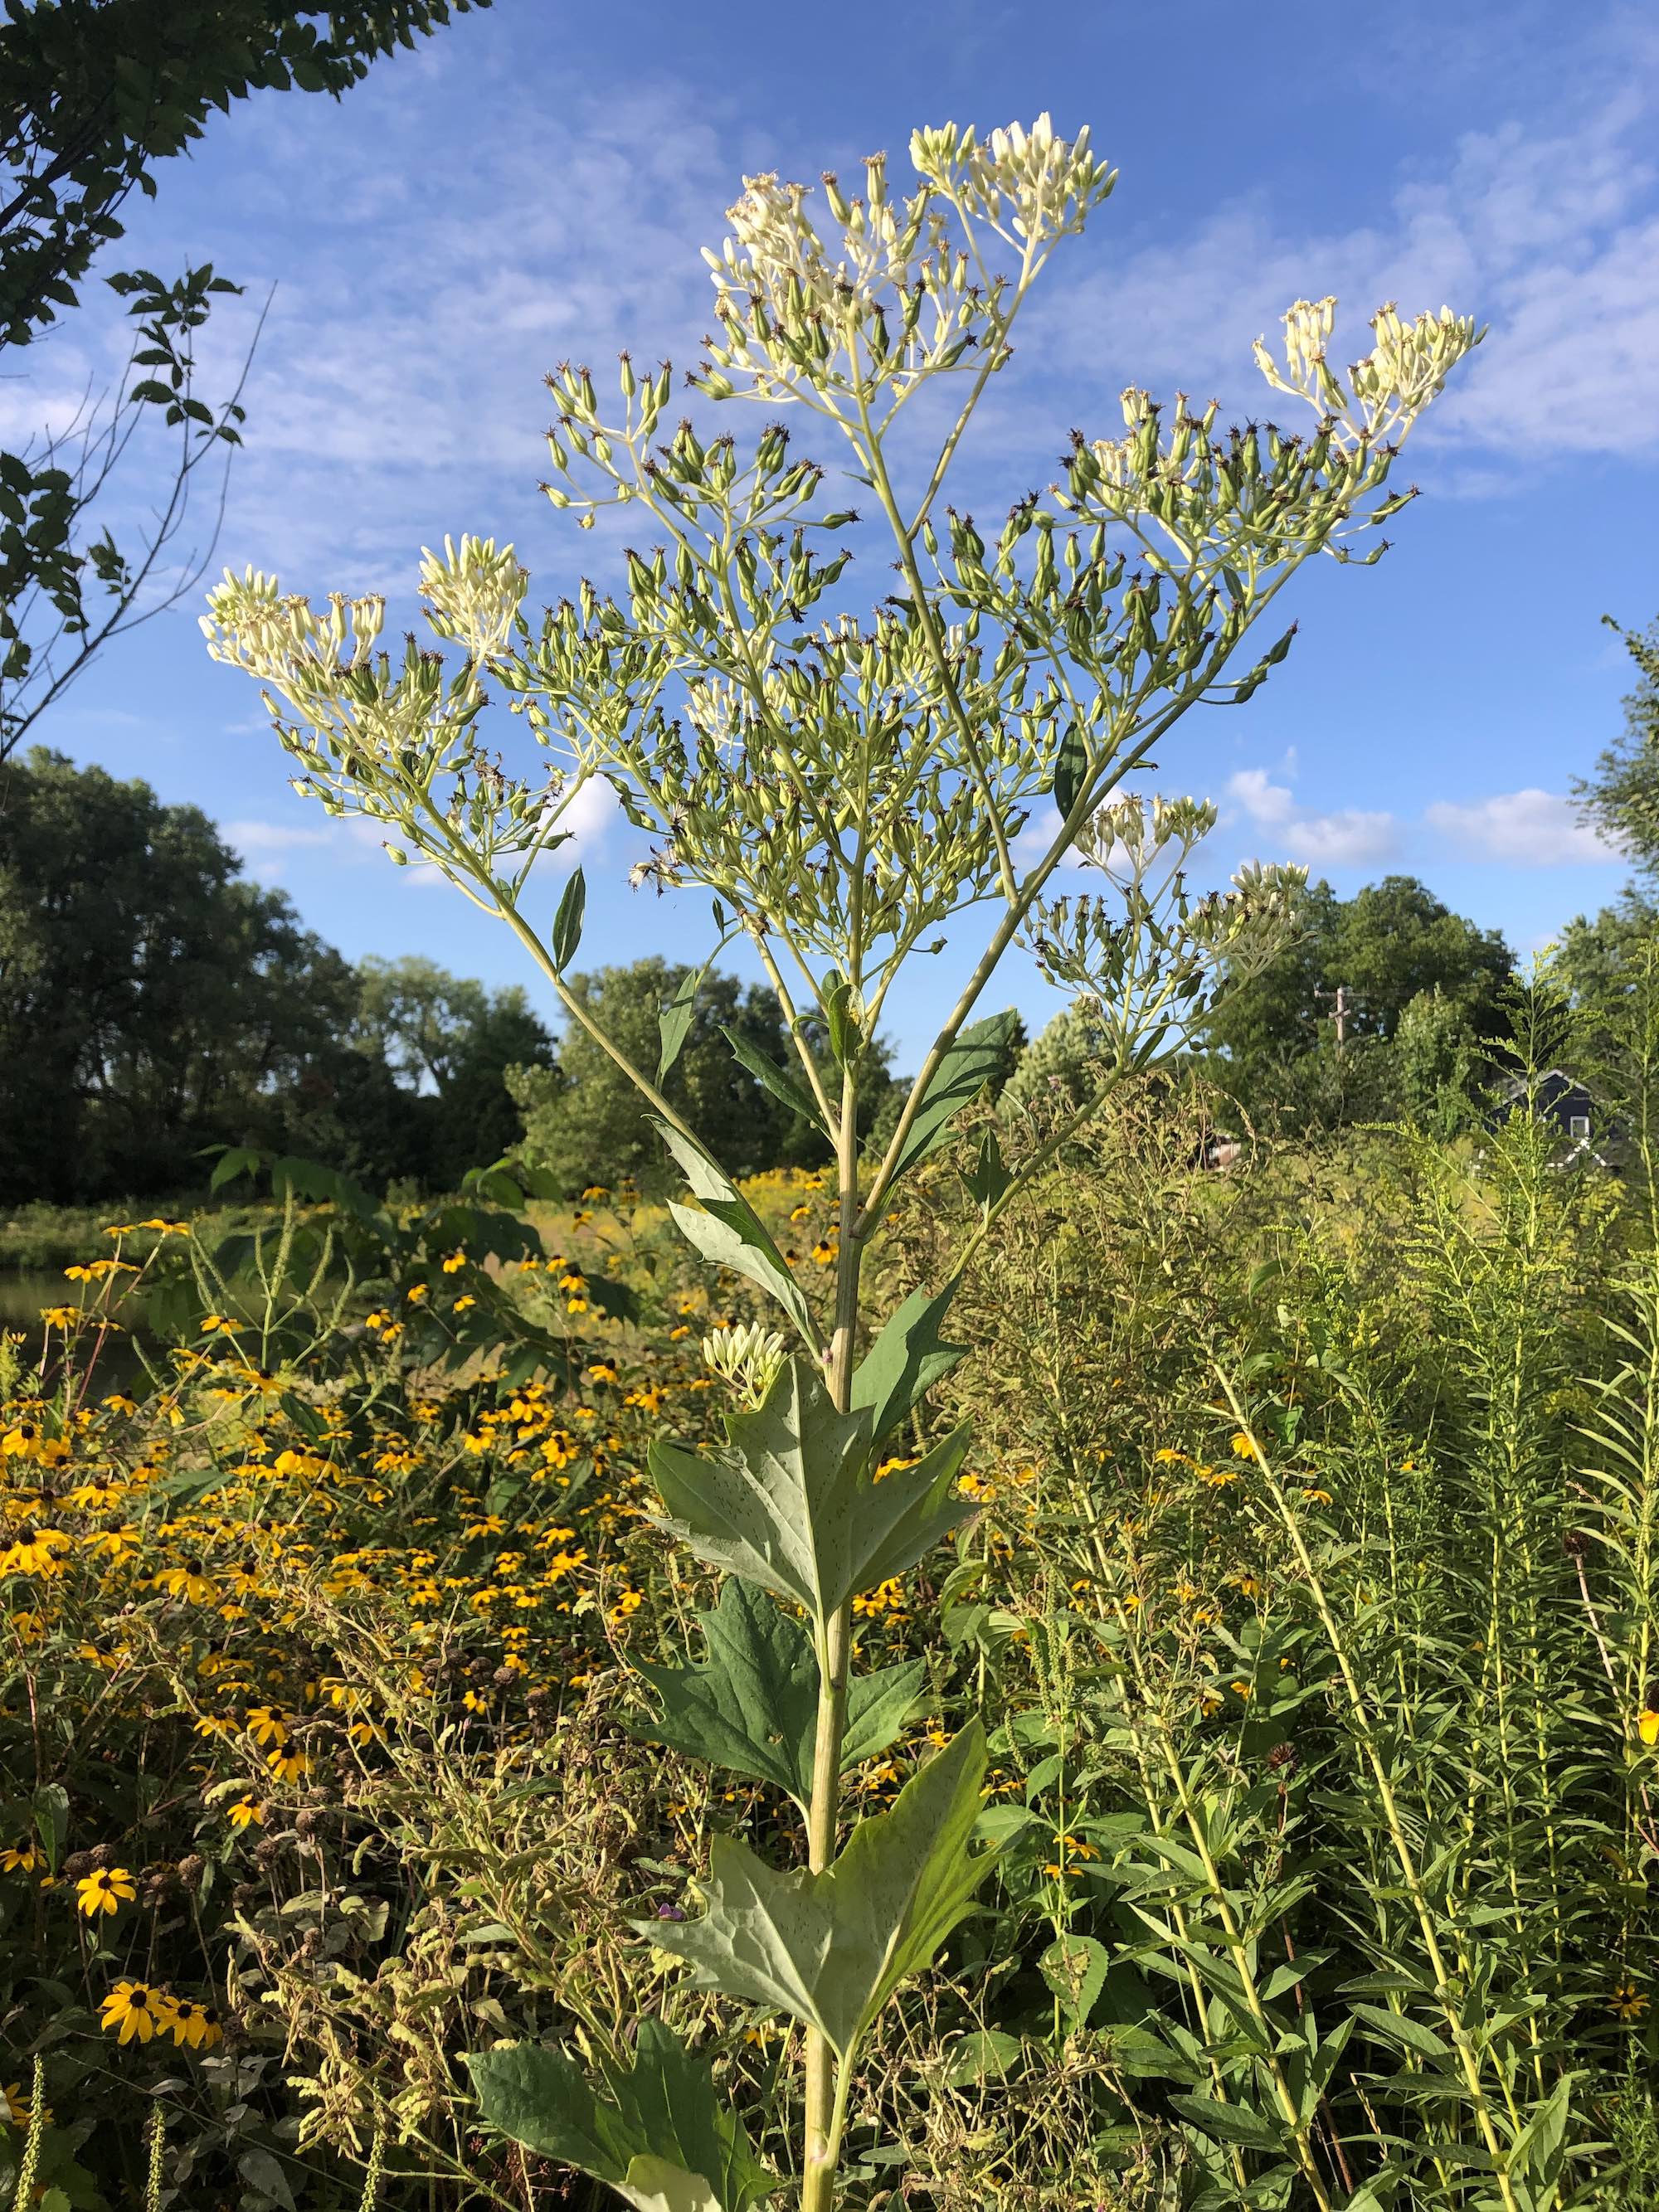 Pale Indian Plantain on bank of retaining pond on corner of Nakoma Road and Manitou Way in Madison, Wisconsin on August 23, 2019.